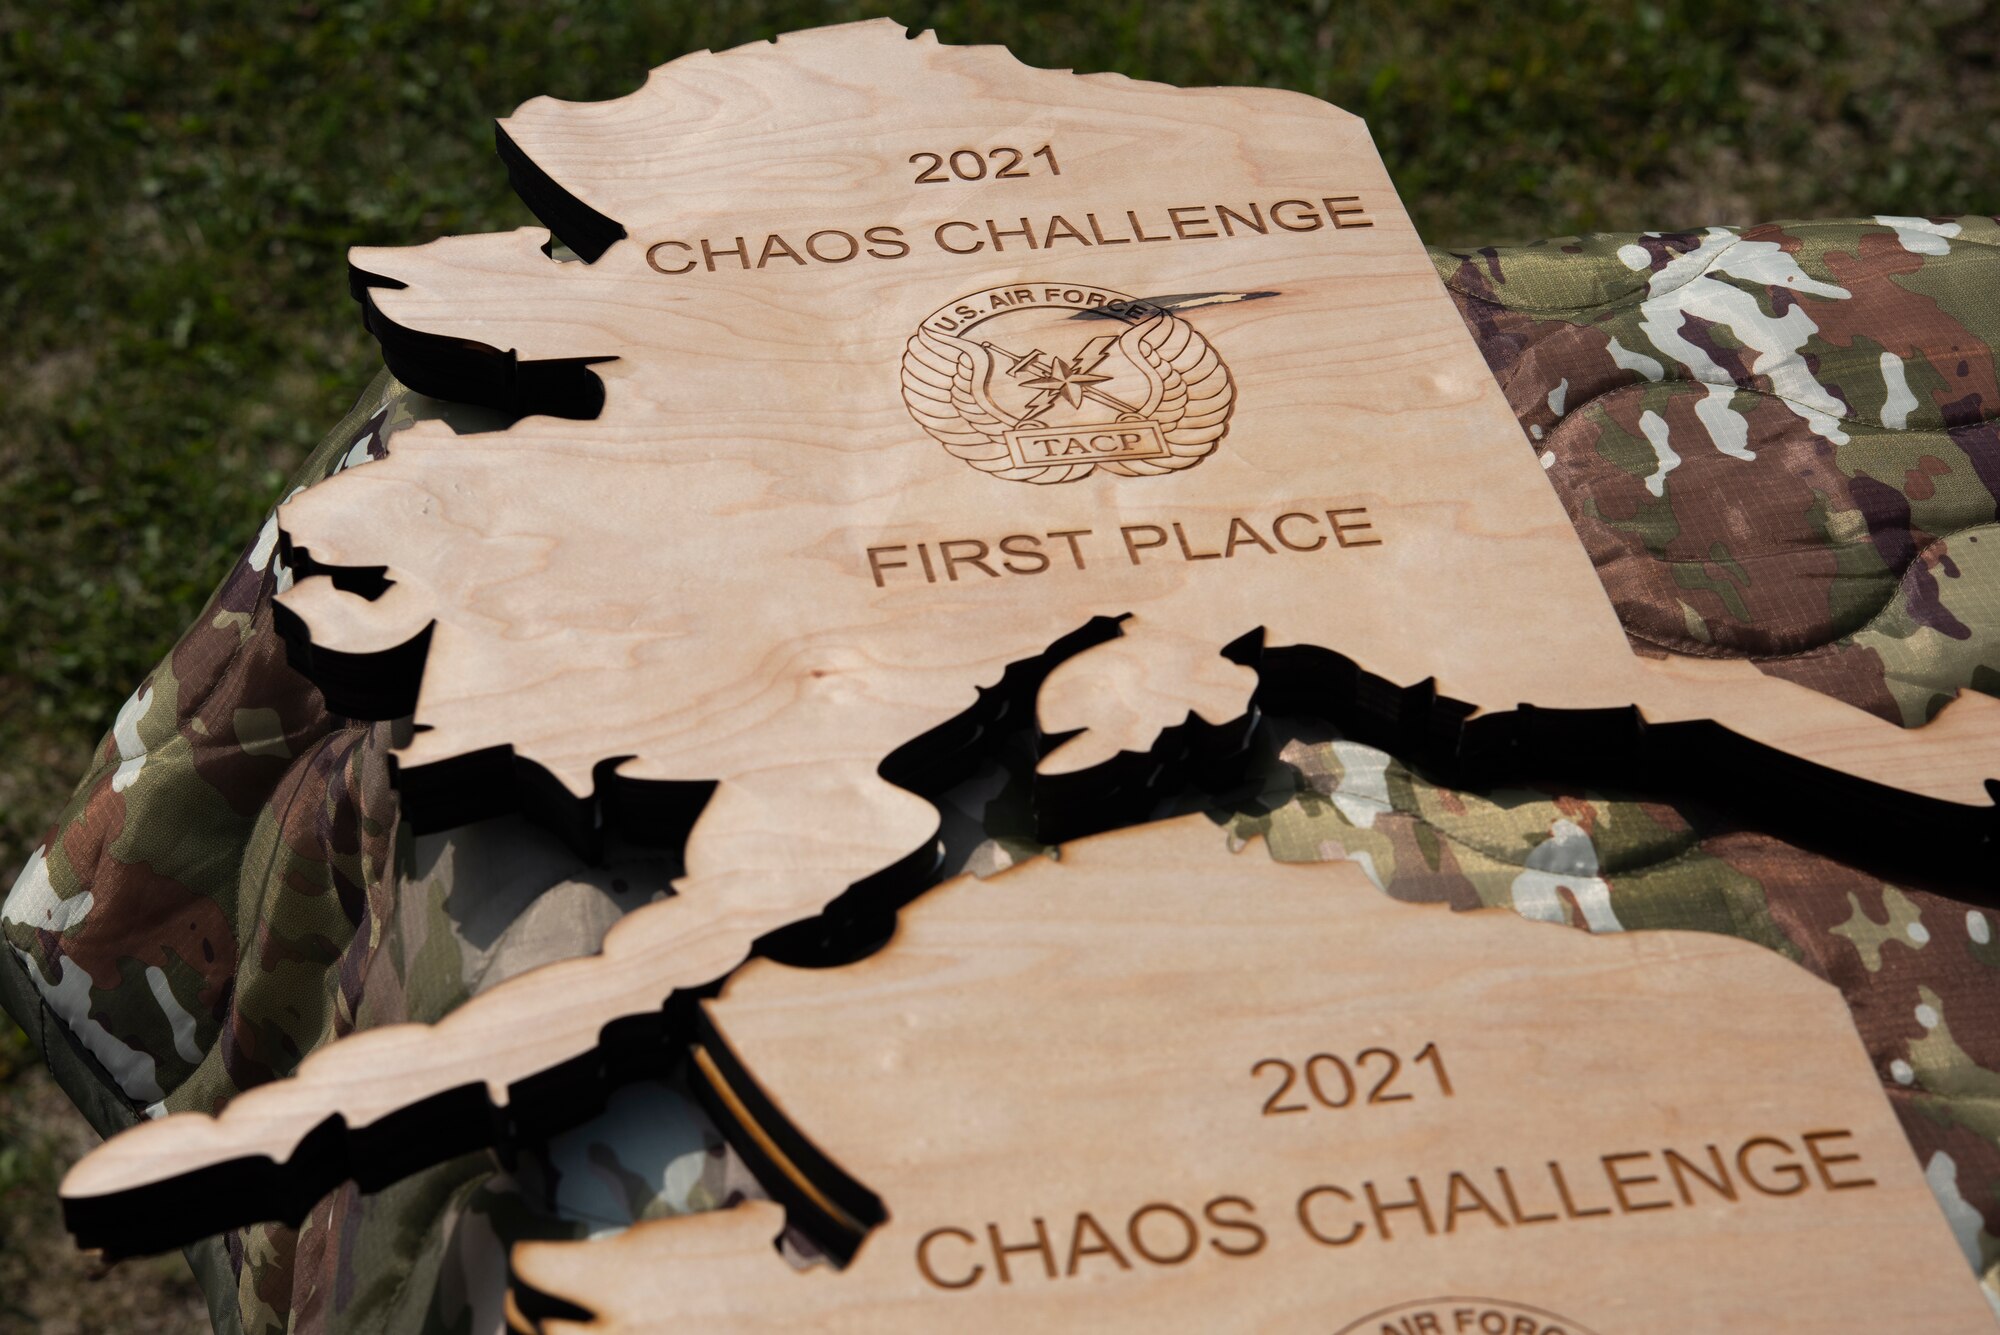 U.S. Air Force tactical air control party (TACP) specialists from the 1st Air Support Operations Group, competed in the Chaos Challenge 2021 at Joint Base Elmendorf-Richardson, Alaska, July 13-15, 2021. The Chaos Challenge 2021 was a multi-day series of mental and physical contests sponsored by the 1st Air Support Operations Group with participants from the 3rd, 5th, 25th, and 604th Air Support Operations Squadrons and a guest team from the 673d Security Forces Squadron. The winner of the competition will go on to compete in Lightning Challenge 2021 to determine the best two-man TACP team in the Air Force.